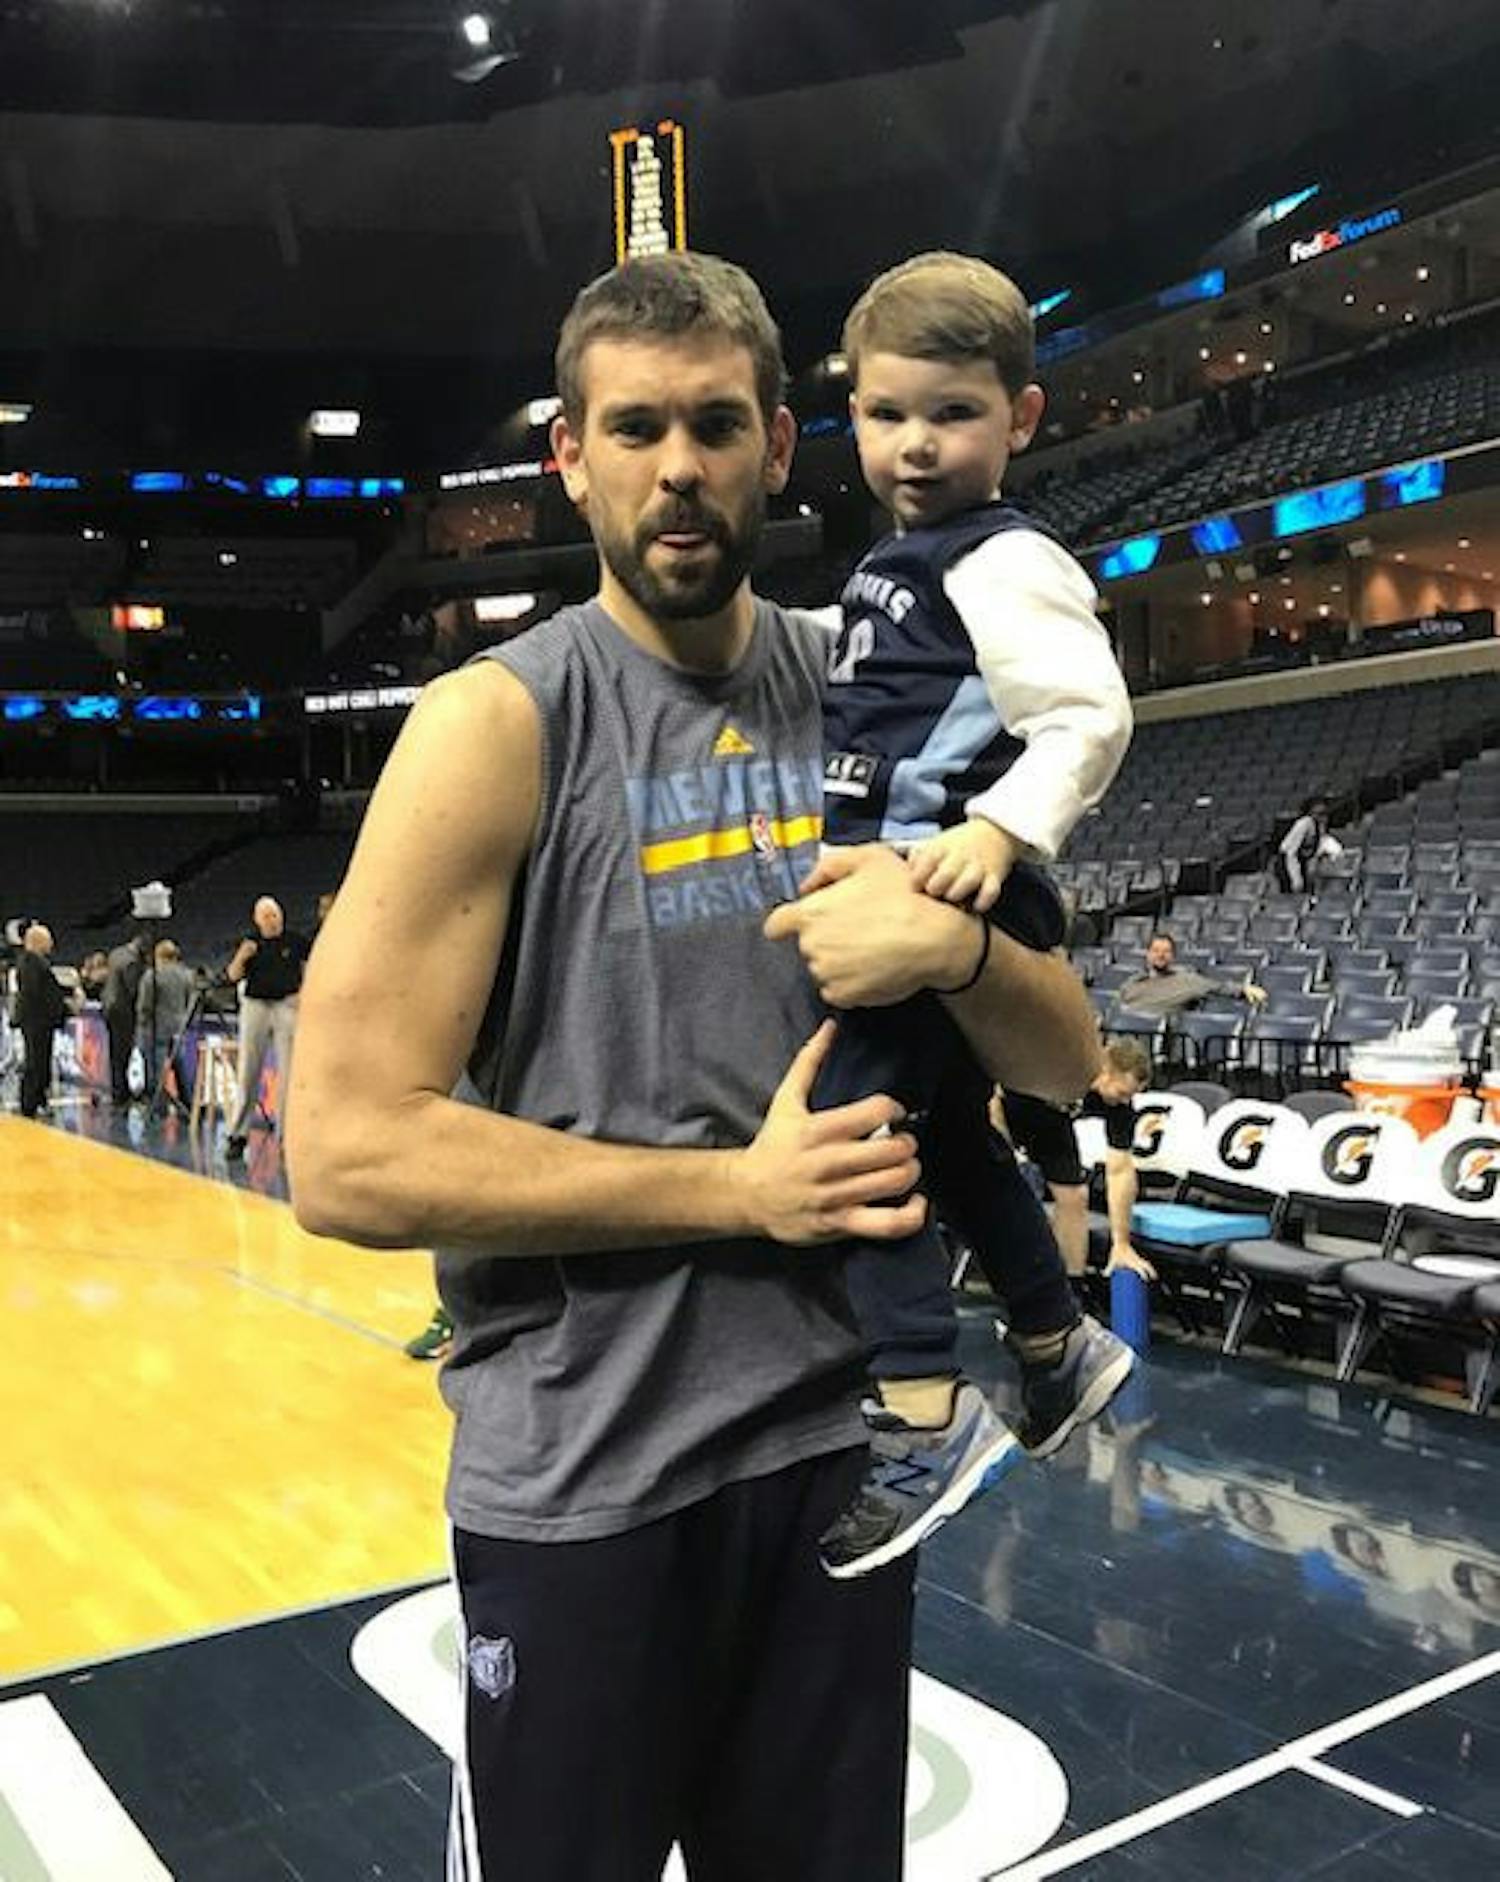 Memphis Grizzlies' player impacts fans on and off the court